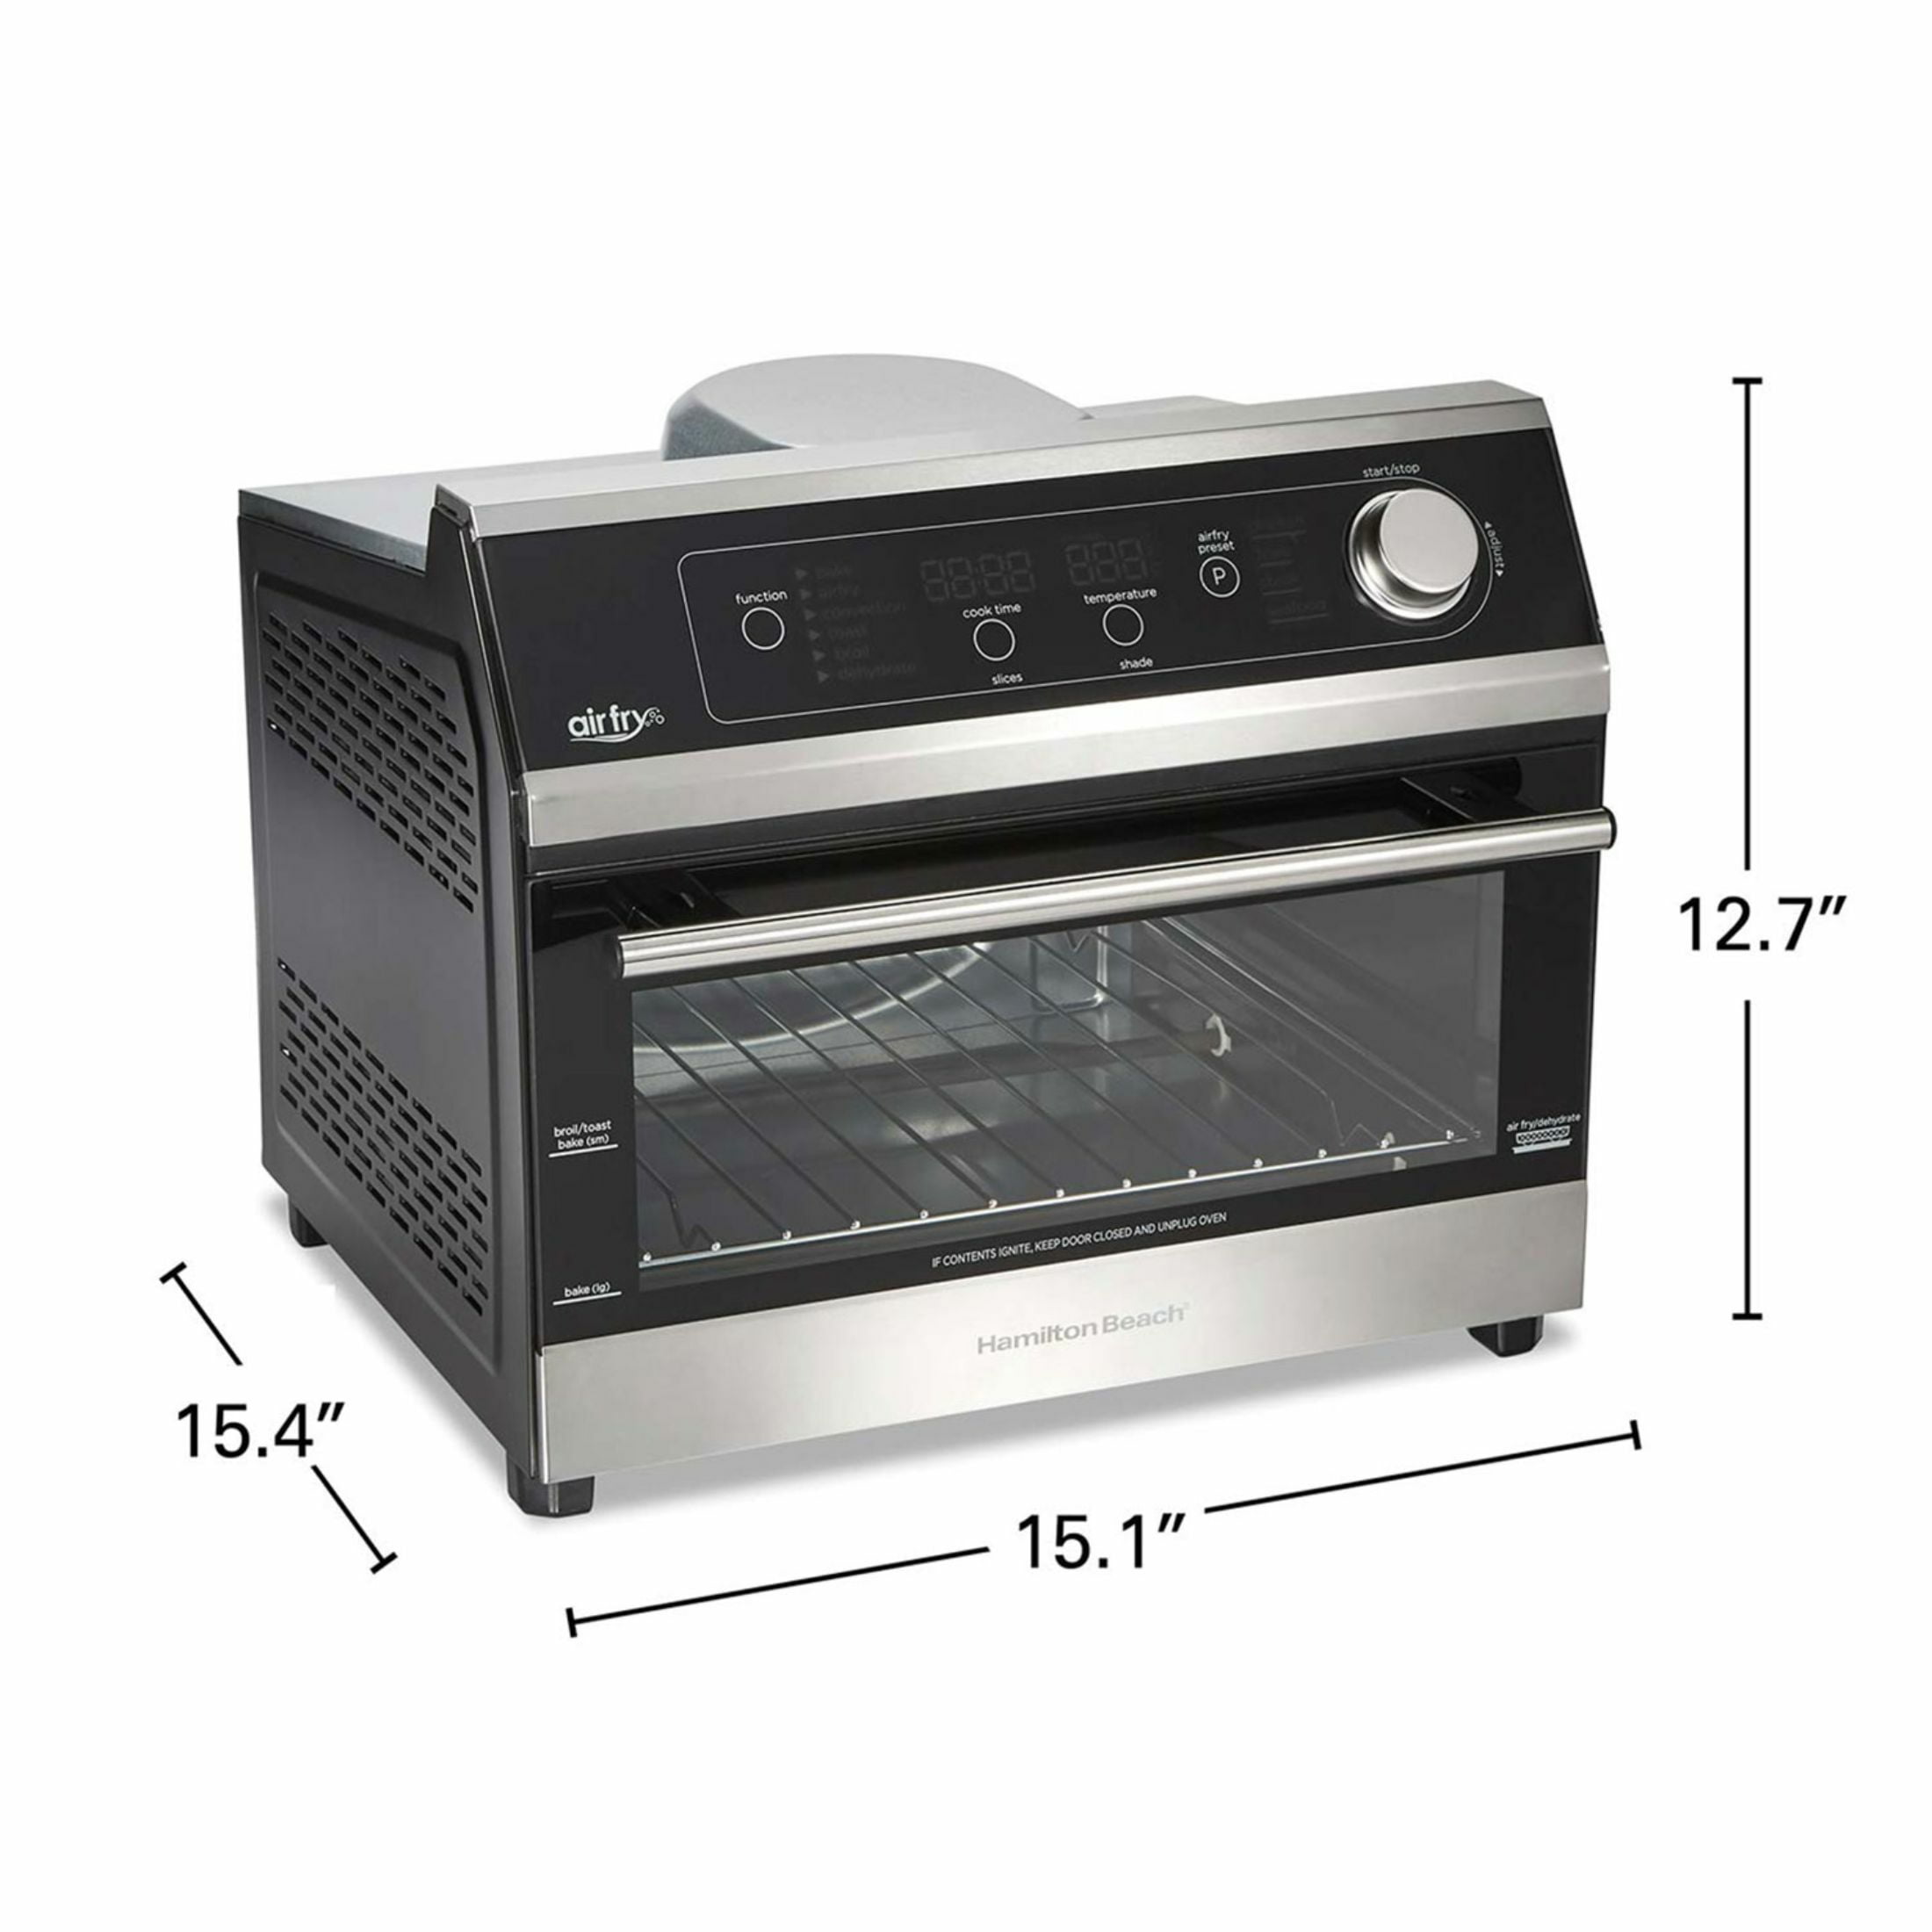 Hamilton Beach Toaster Oven Air Fryer Combo, Includes Bake, Broil, and  Toast, Fits 12” Pizza, 1800 Watts, 6 Cooking Modes, Stainless Steel